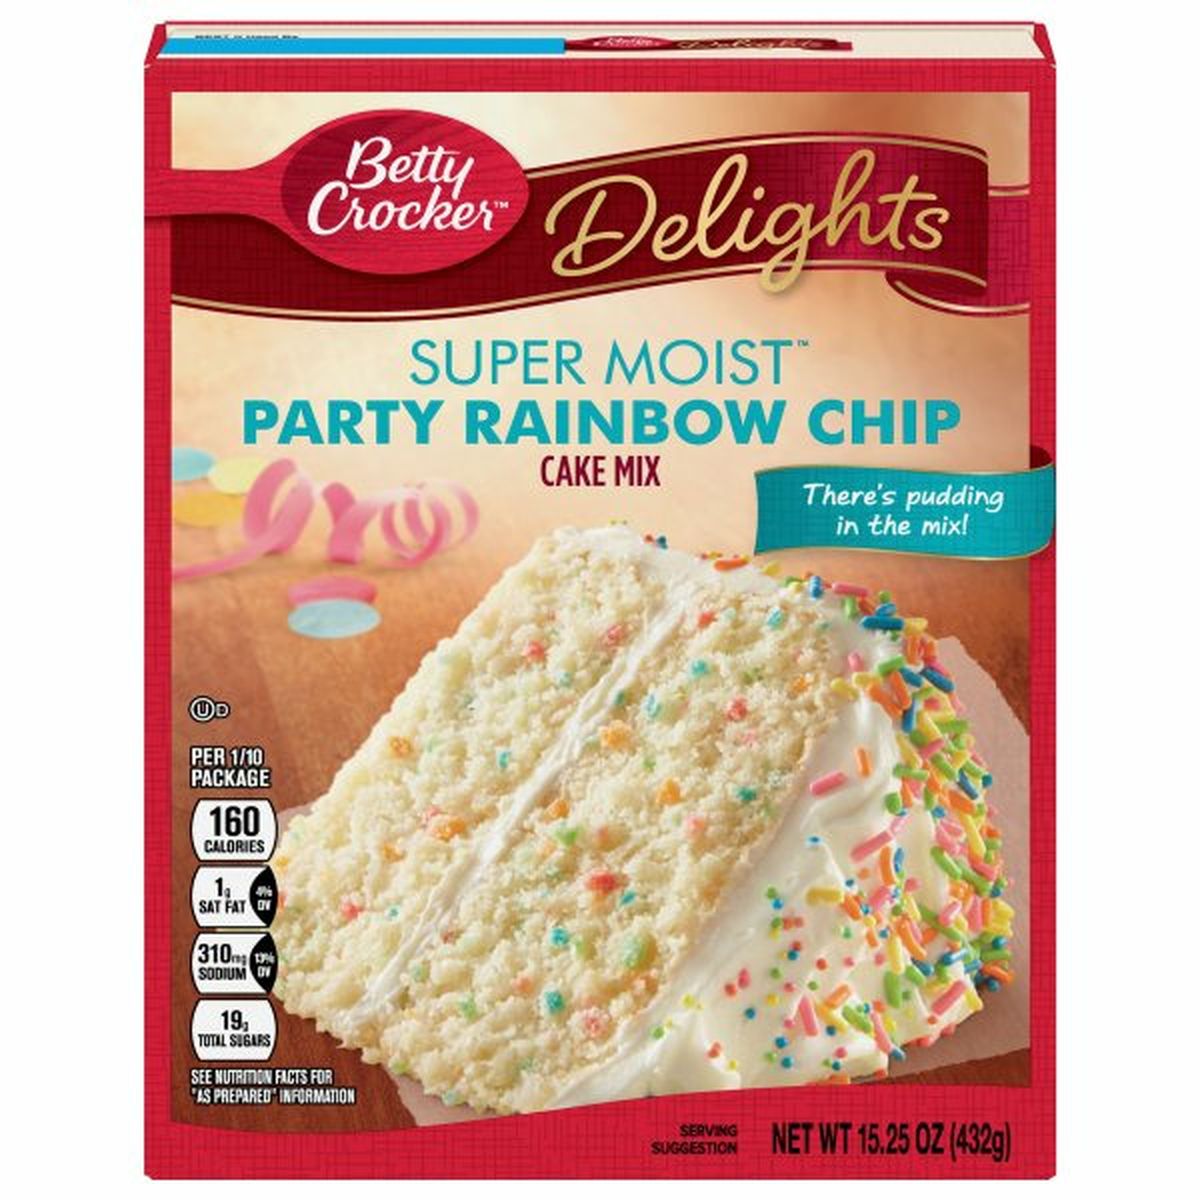 Calories in Betty Crocker Delights Cake Mix, Party Rainbow Chip, Super Moist